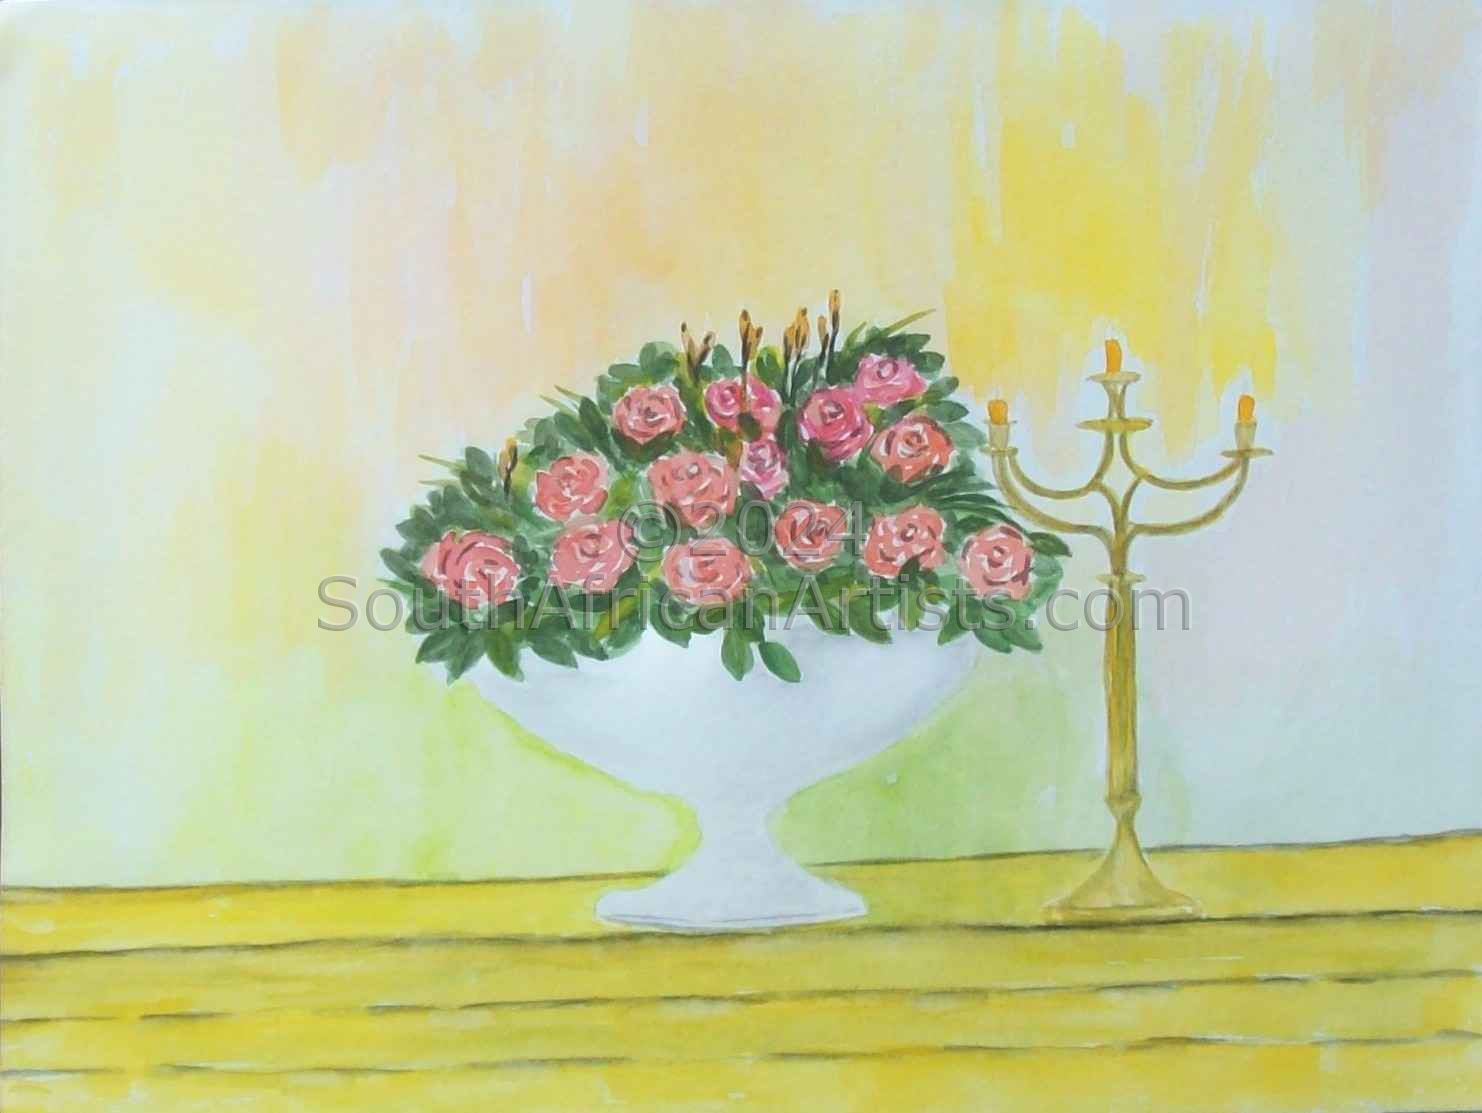 The Roses and Vase